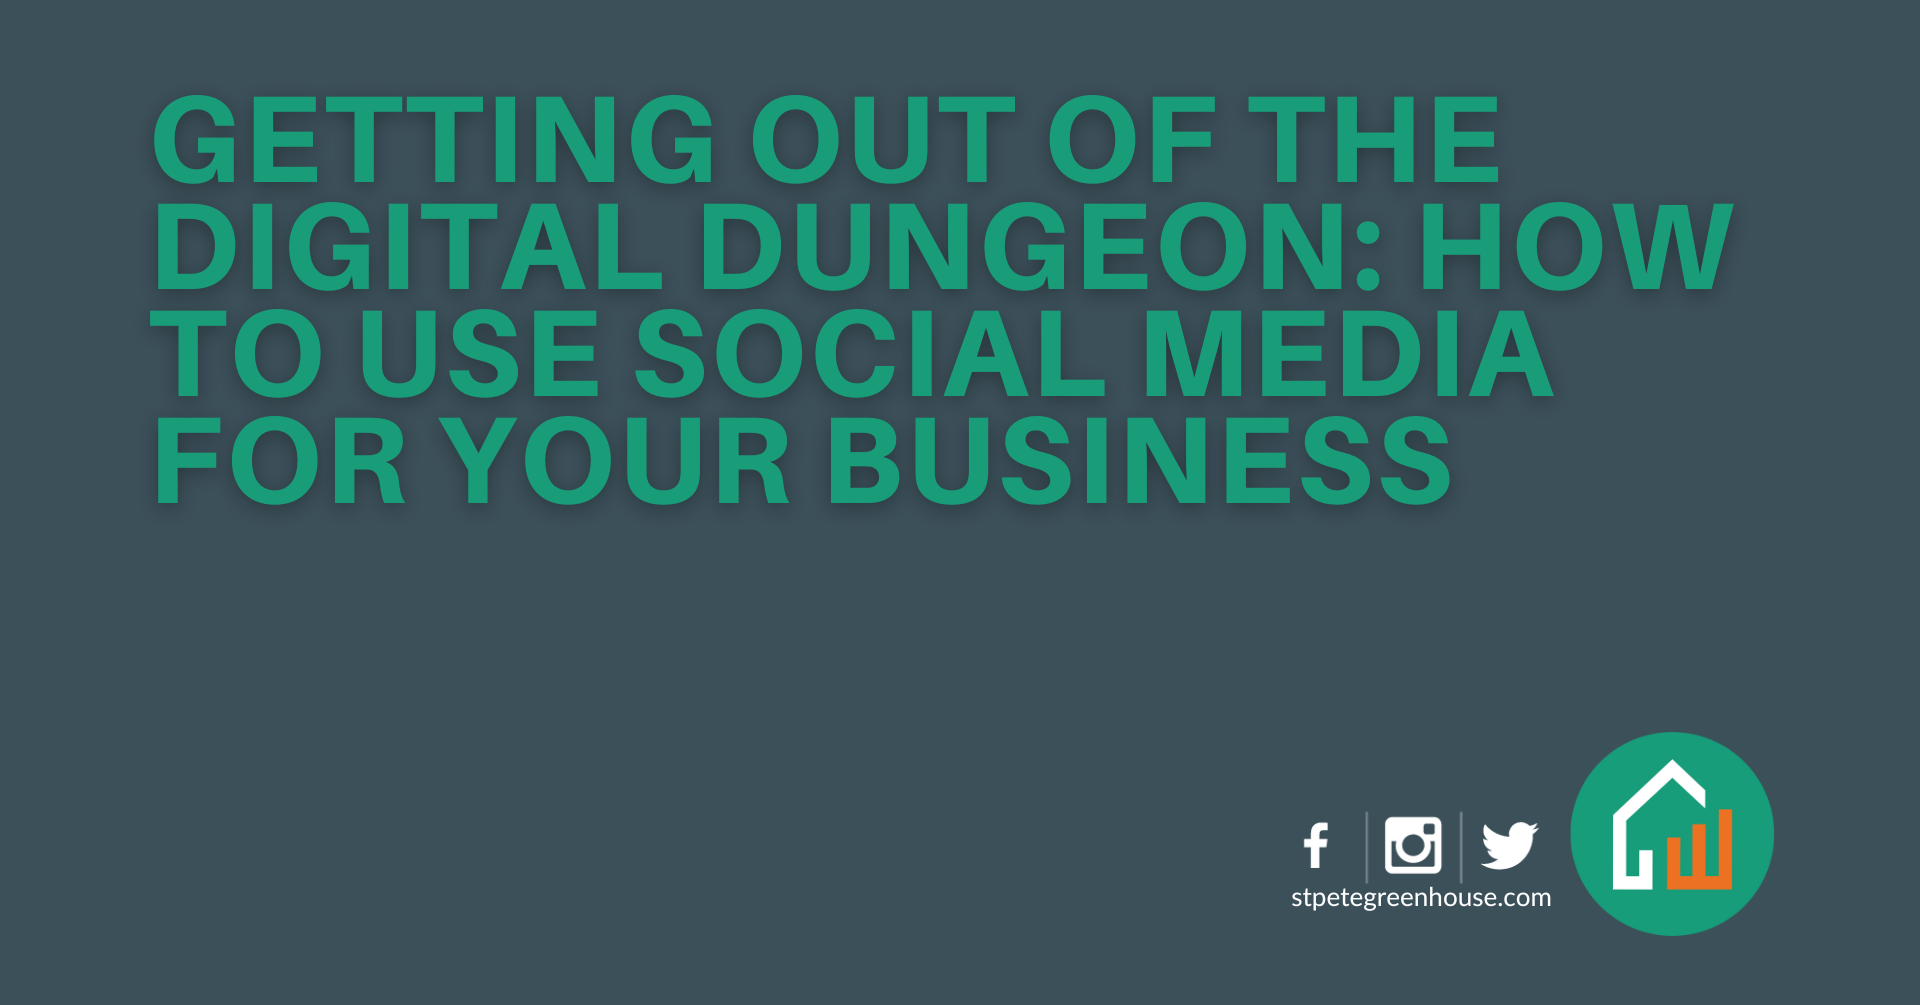 Getting Out of The Digital Dungeon: How to Use Social Media for Your Business main image